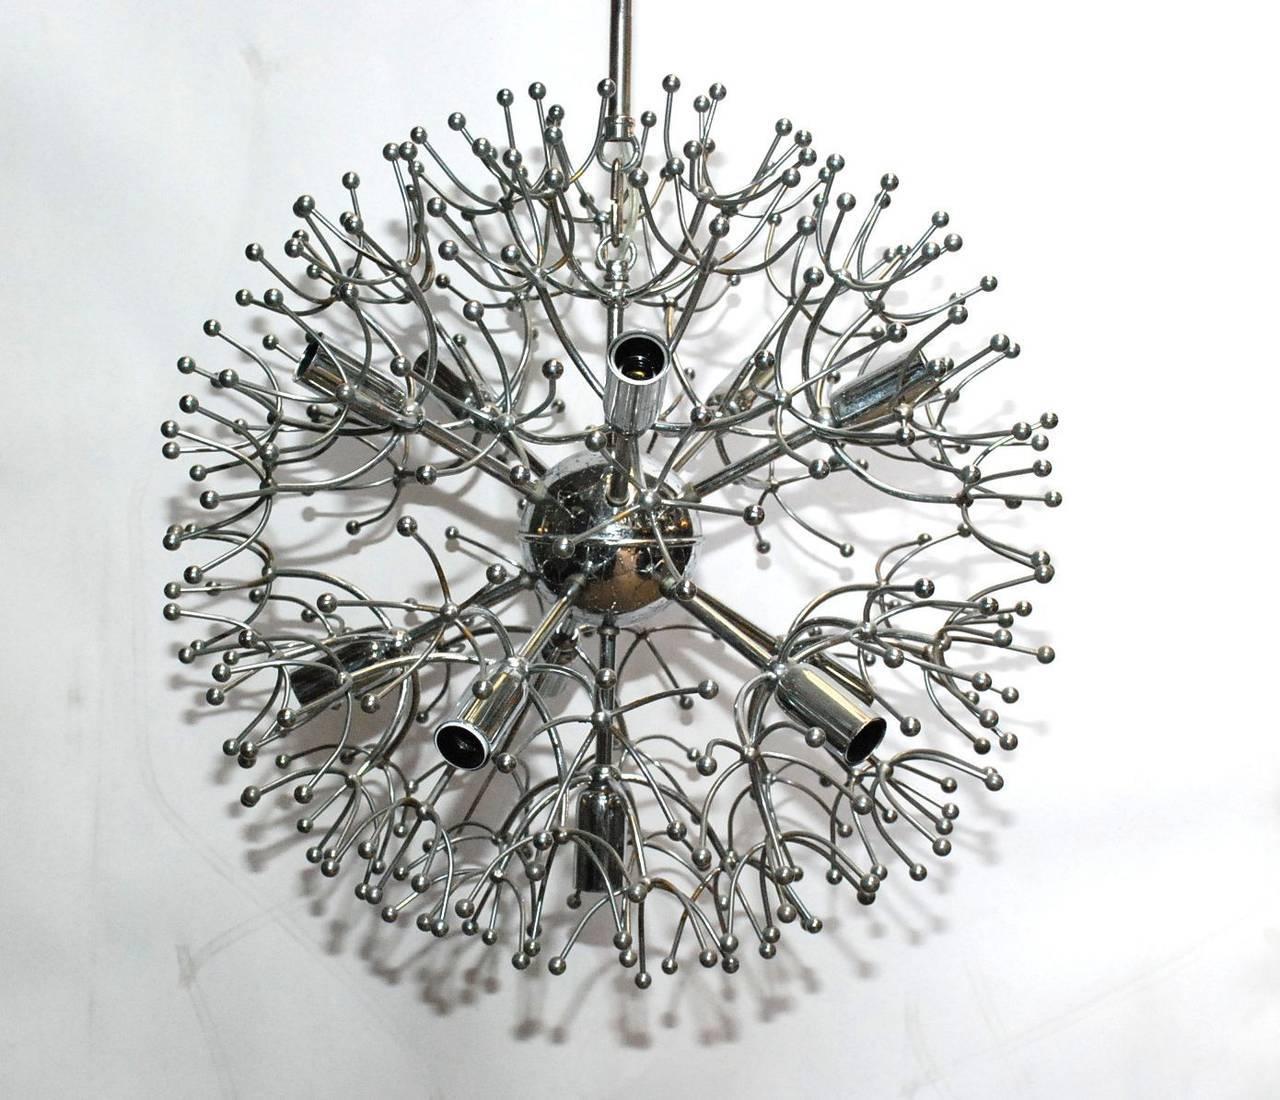 Vintage Italian chrome sputnik with curved and minuscule sphere details / Designed by Sciolari circa 1970’s / Made in Italy
11 lights/ E14 type / max 40W each
Diameter: 18 inches / Height: 26 inches including rod and canopy 
1 in stock in Palm